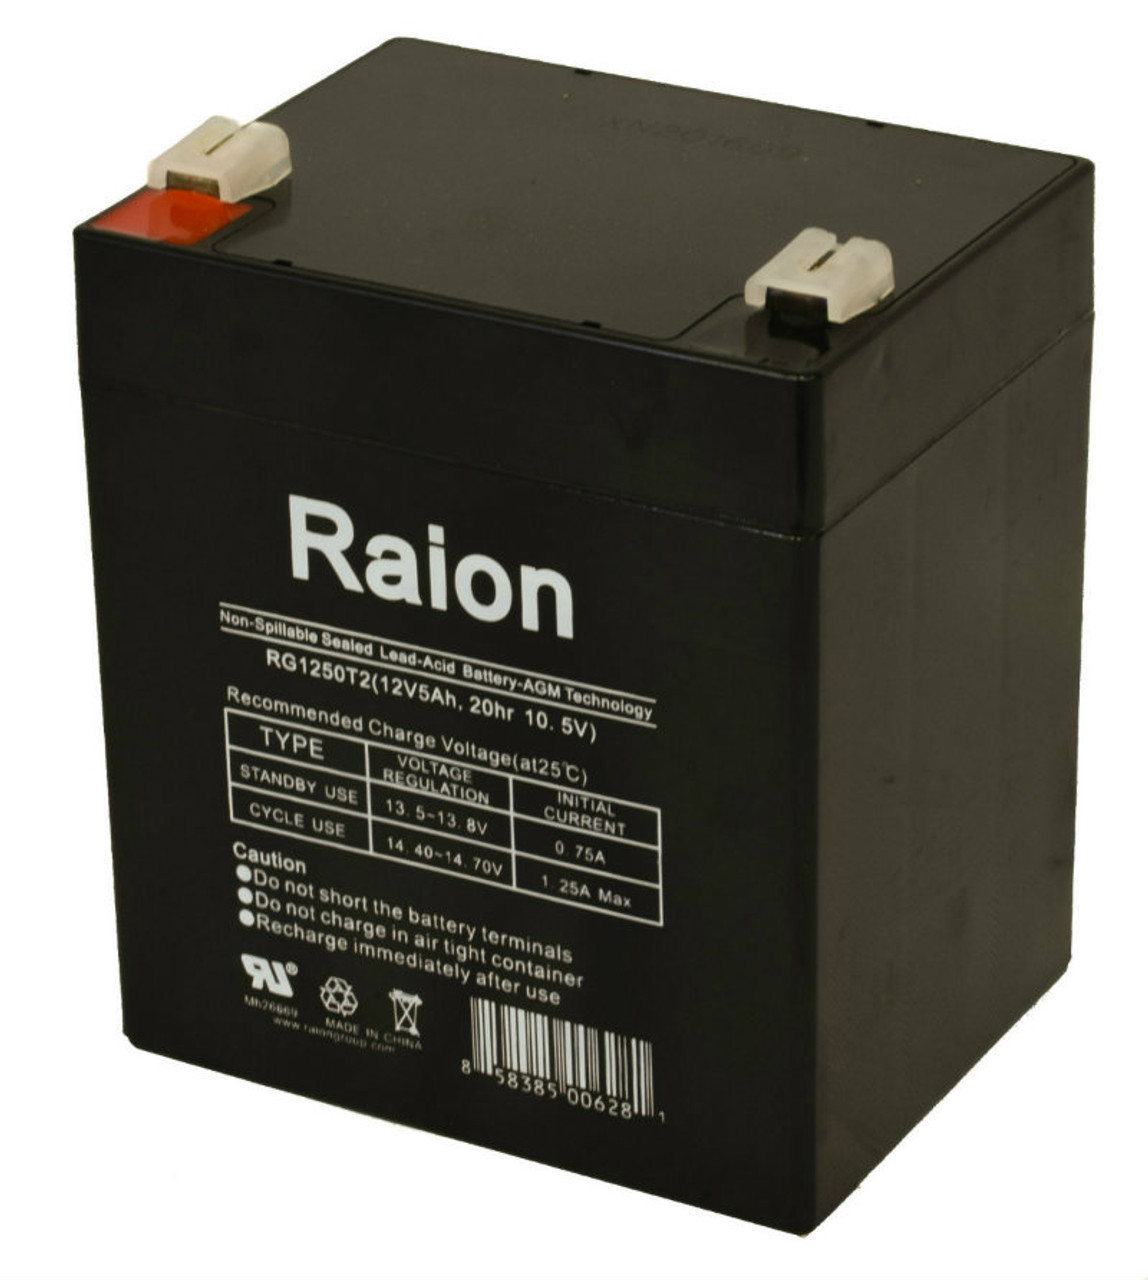 Raion Power RG1250T1 Replacement Alarm Security System Battery for Securitron M62G